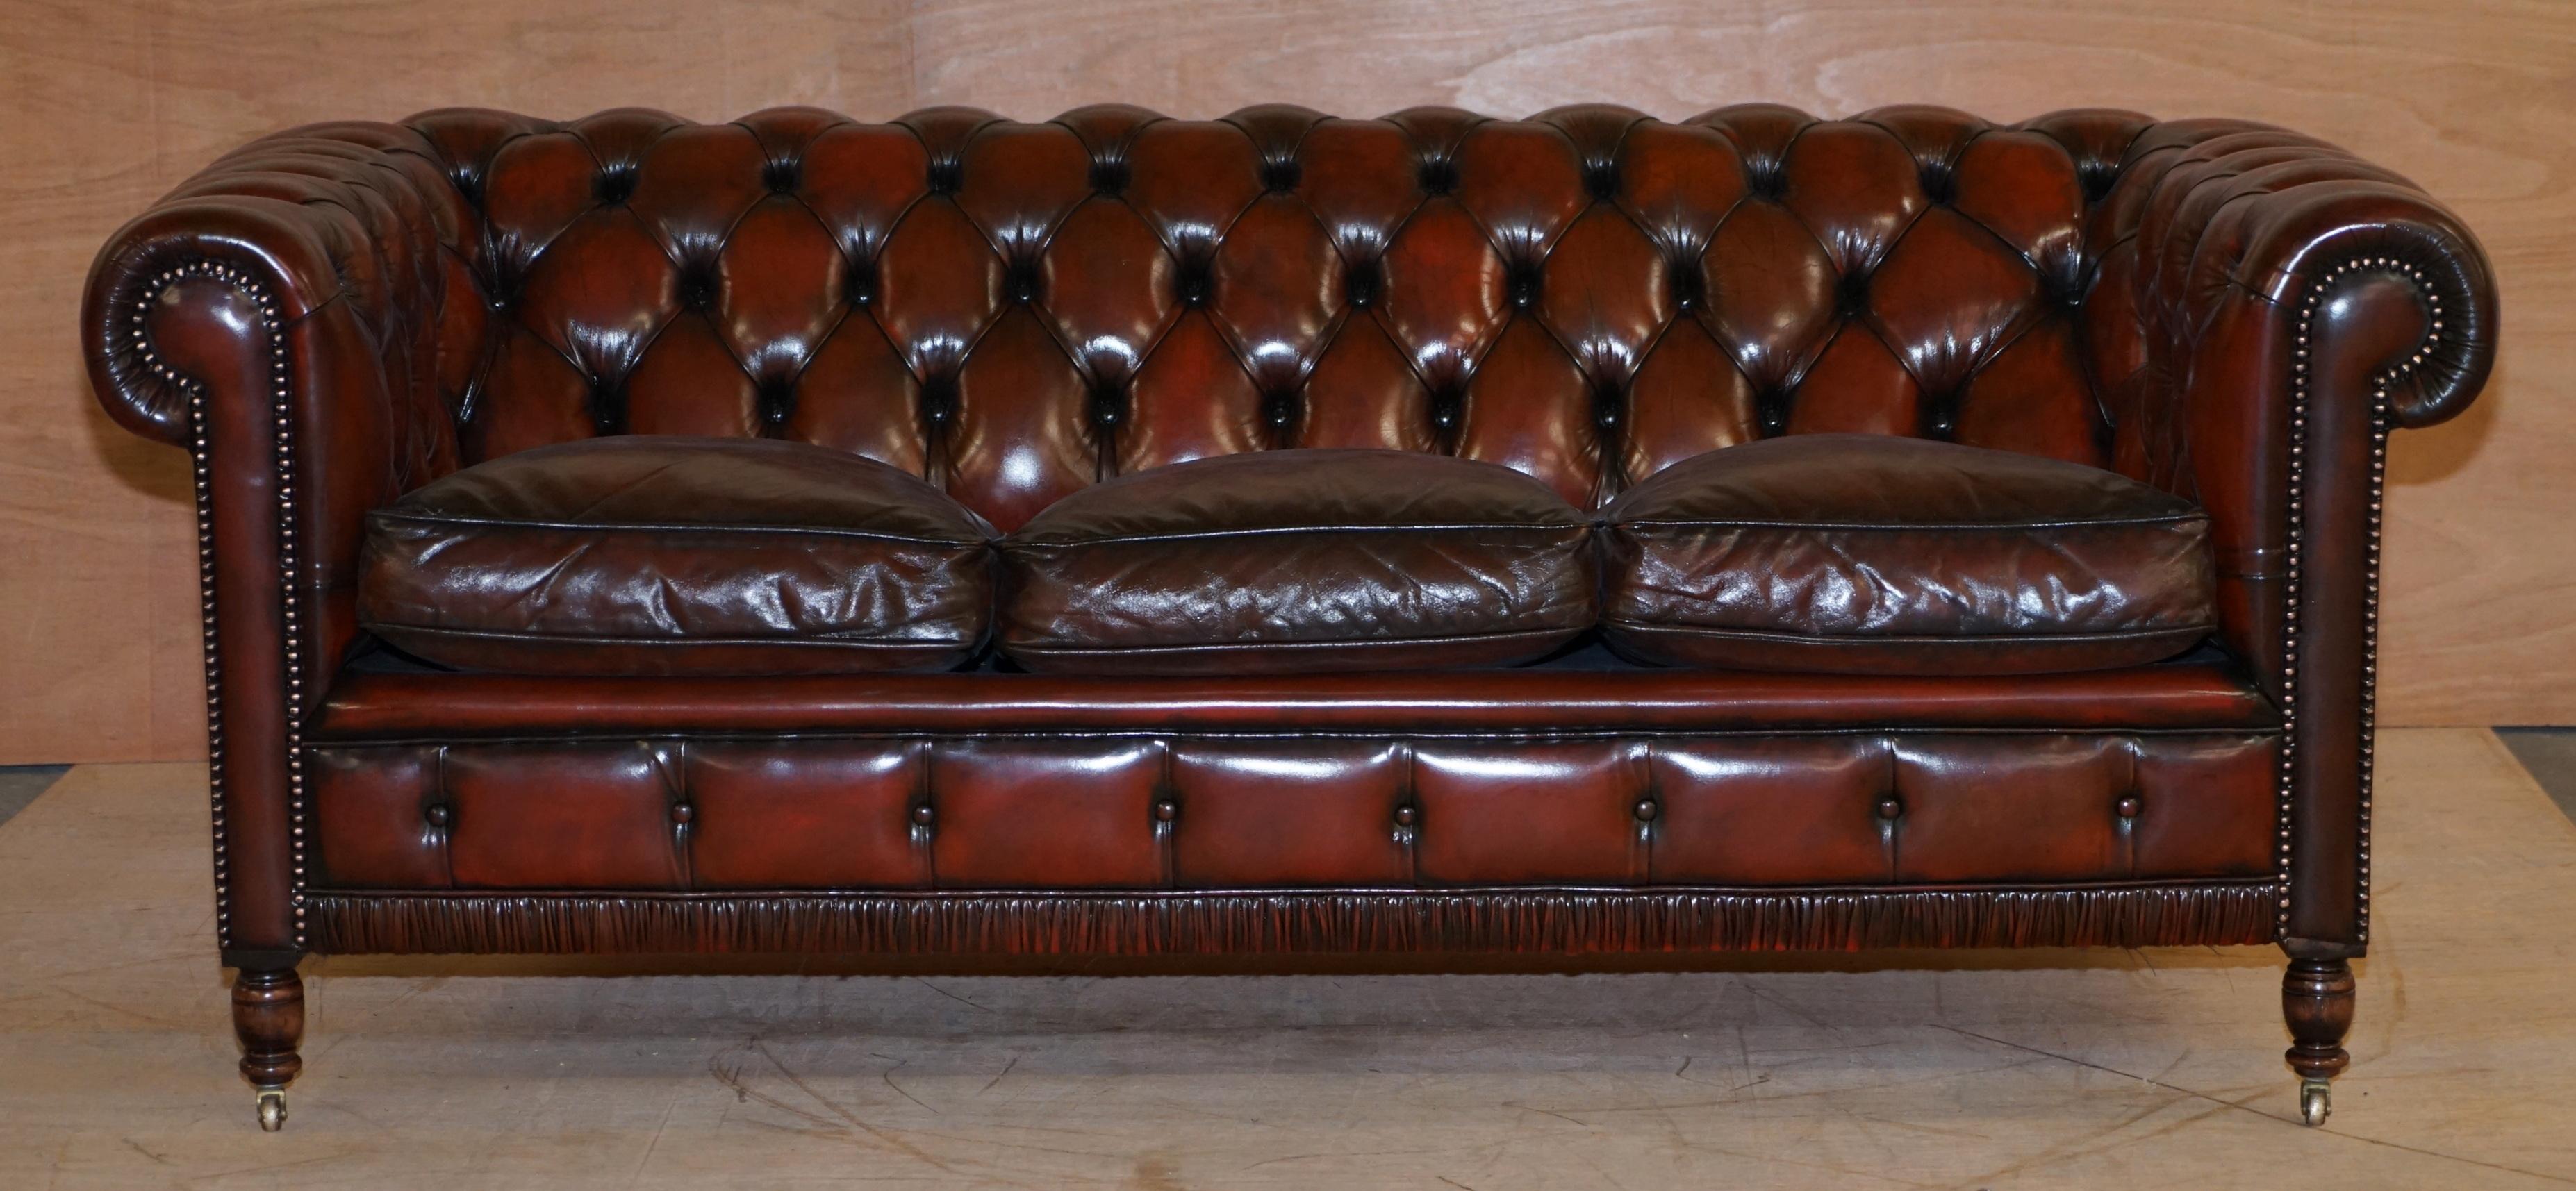 We are delighted to offer for sale this stunning very rare hand made in England fully restored Bordeaux leather Gentleman's club sofa

Where to begin! This sofa is absolute eye candy from every angle, it has the original leather hide, the leather